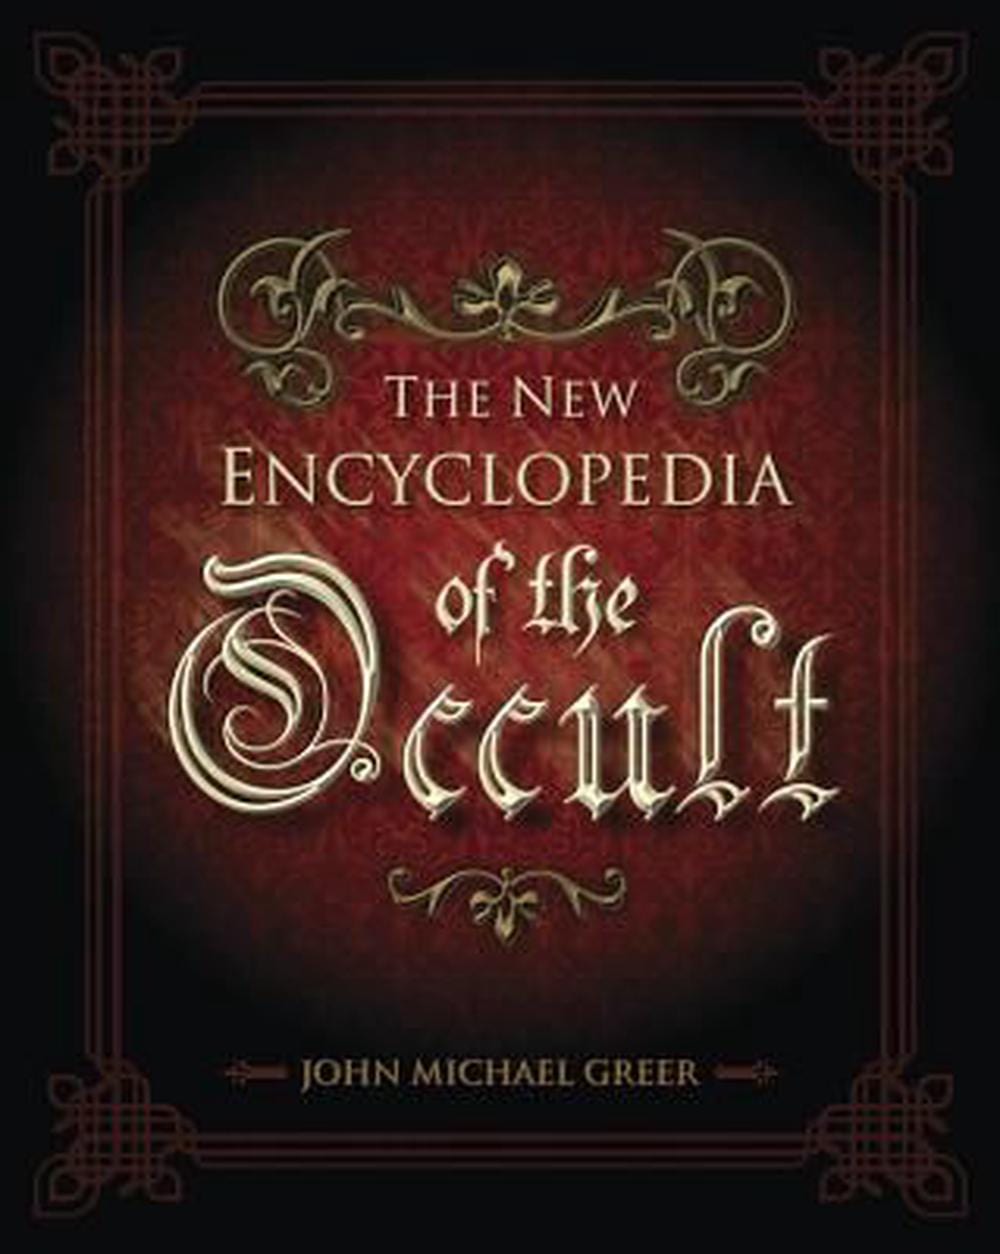 New Encyclopedia of the Occult by John Michael Greer - Third Eye